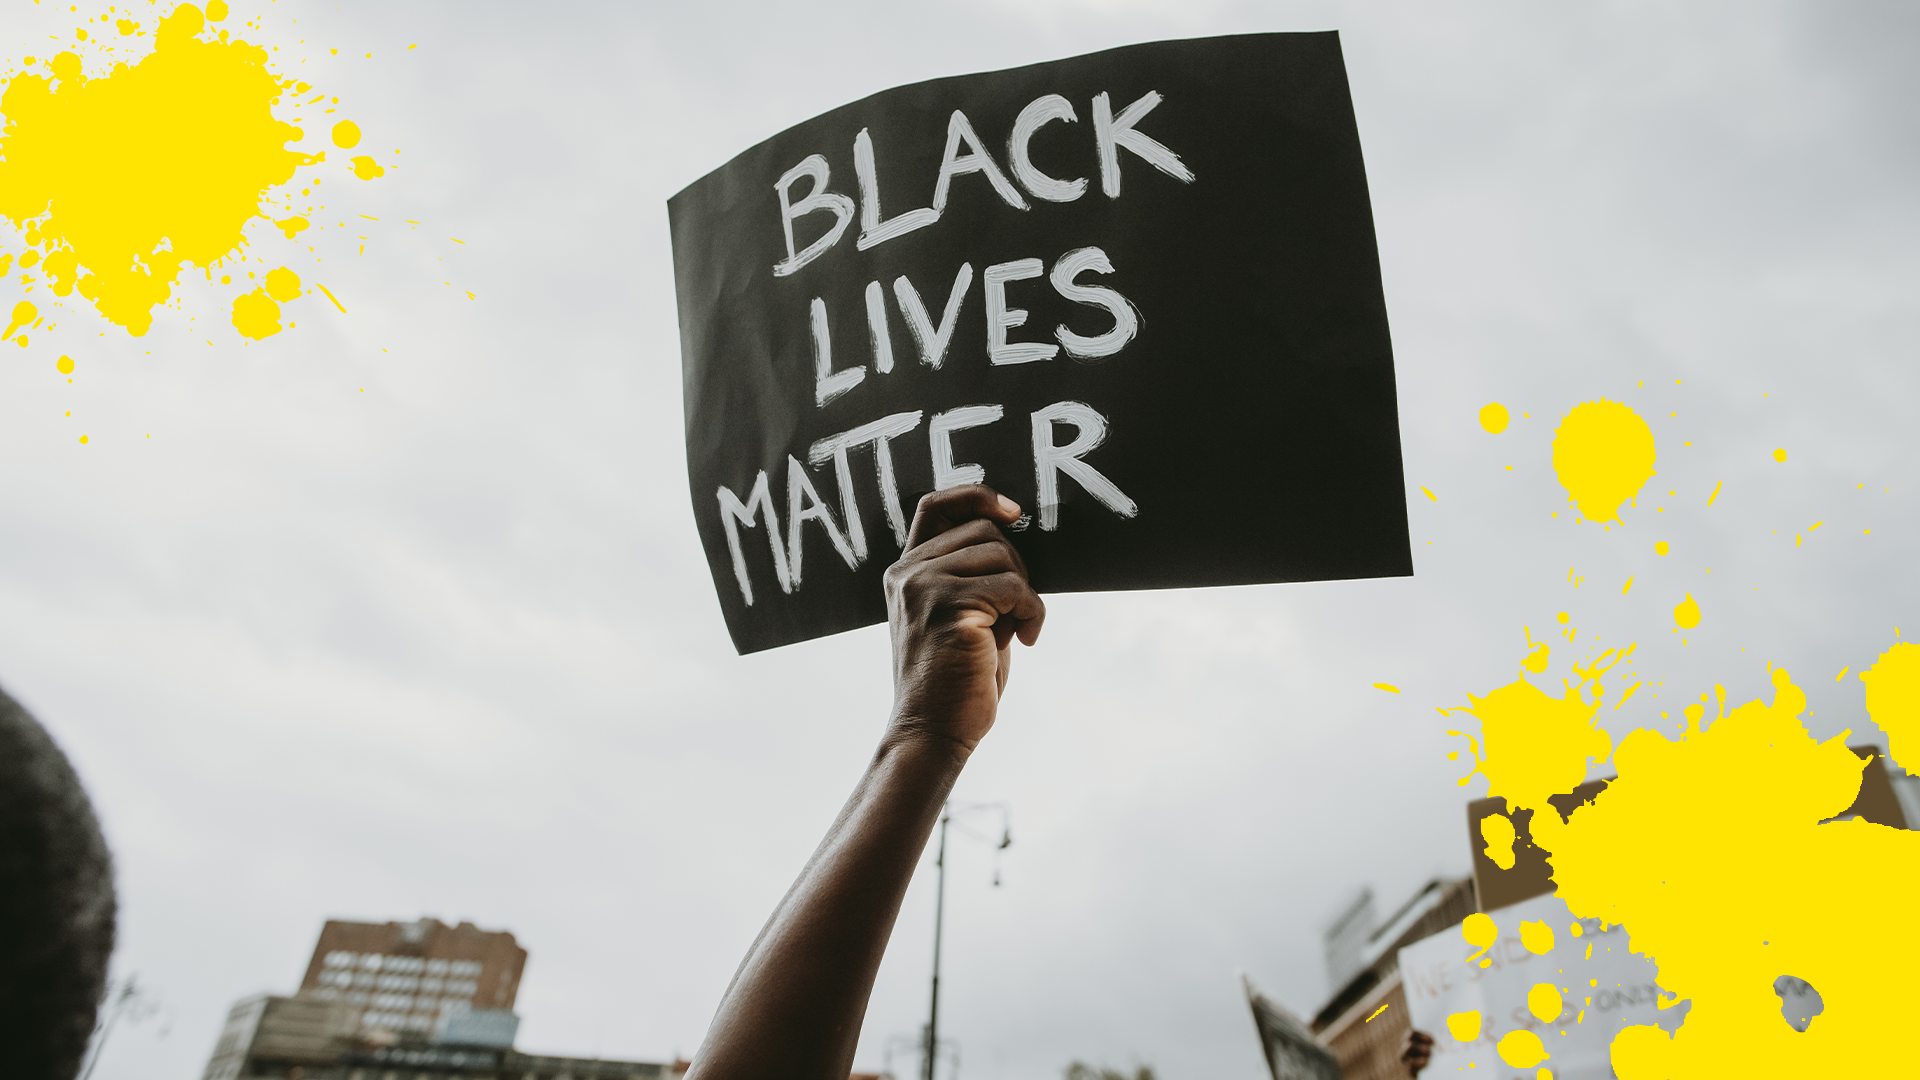 Hand holding a Black Lives Matter sign with yellow splats